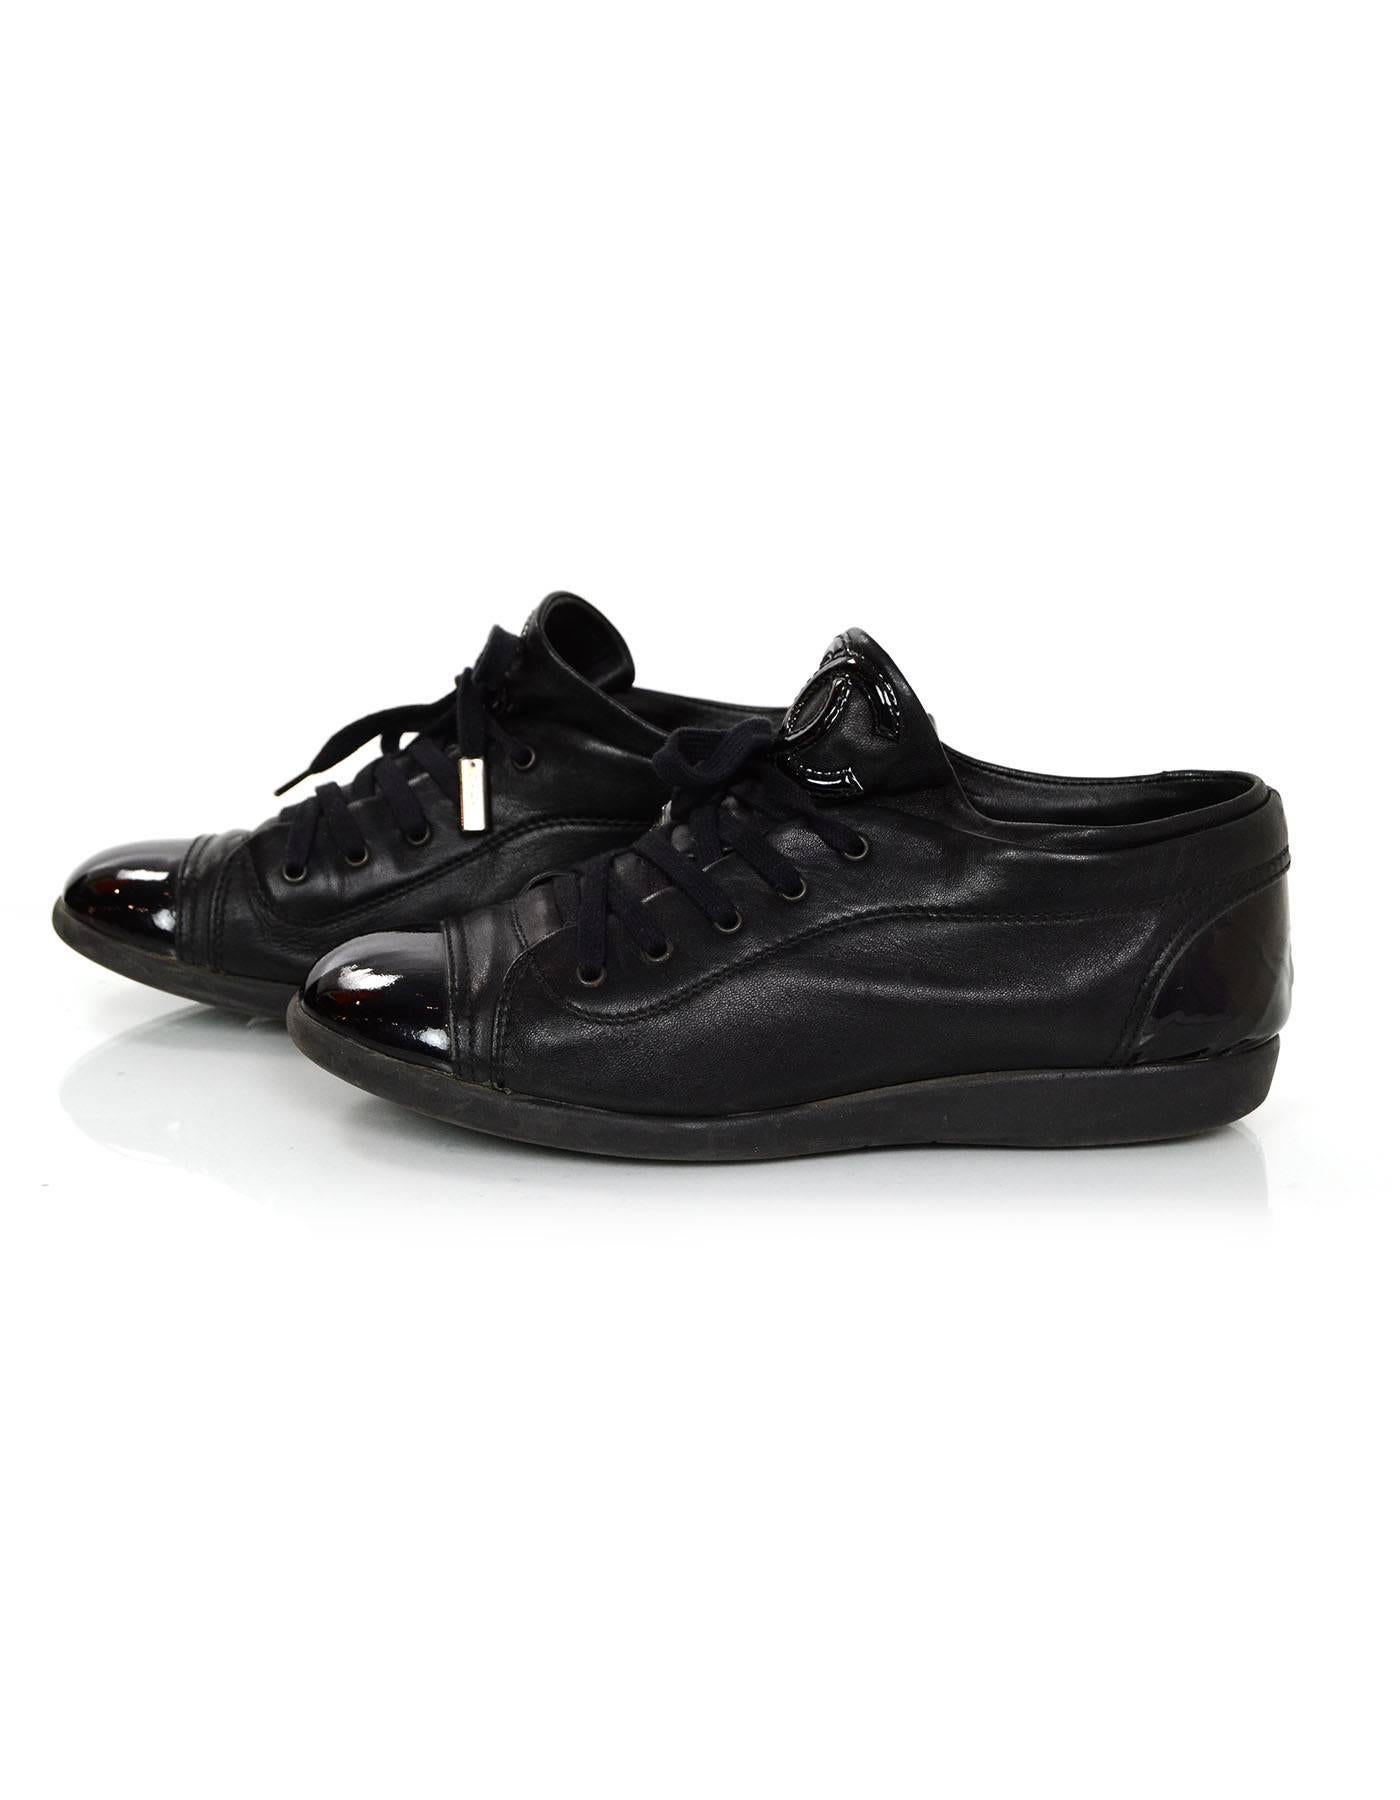 Chanel Black Leather Sneakers
Features patent leather toe and heel cap

Made In: Italy
Color: Black
Materials: Leather and patent leather
Closure/Opening: Lace up
Sole Stamp: Chanel Made in Italy
Overall Condition: Excellent pre-owned